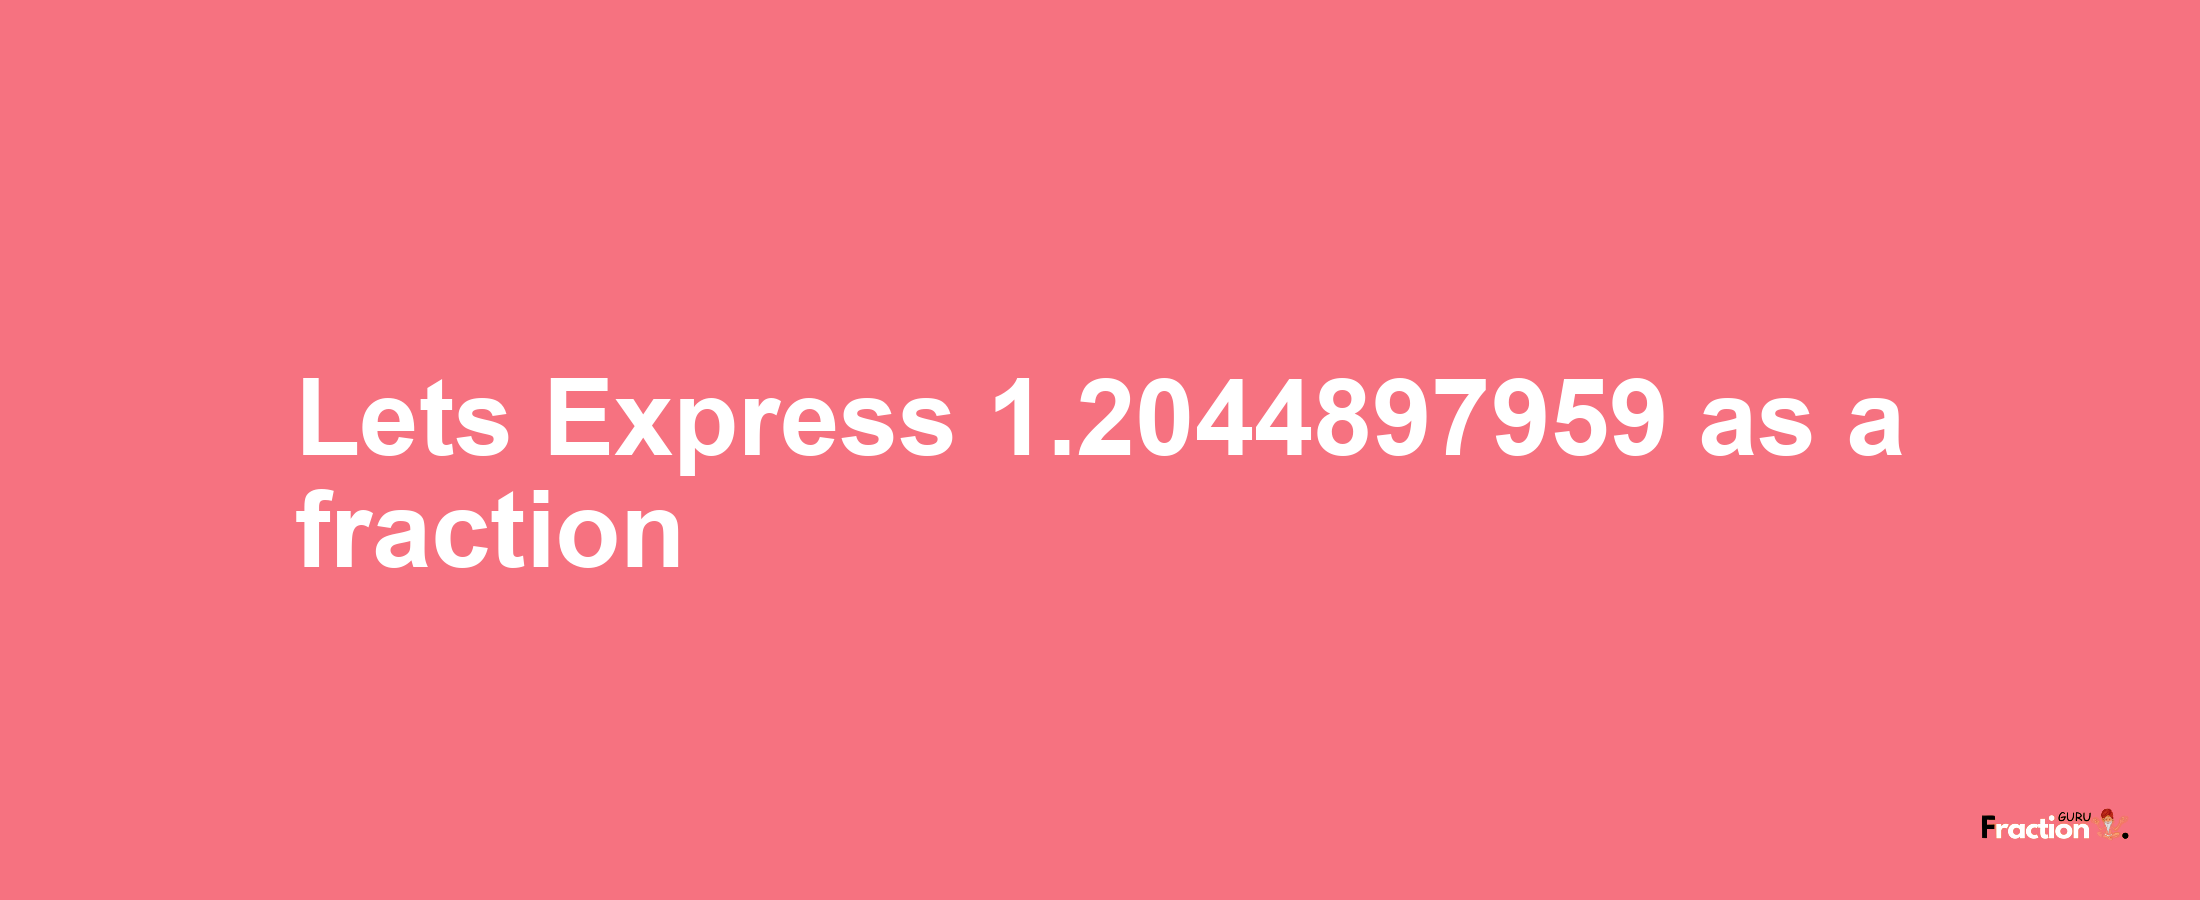 Lets Express 1.2044897959 as afraction